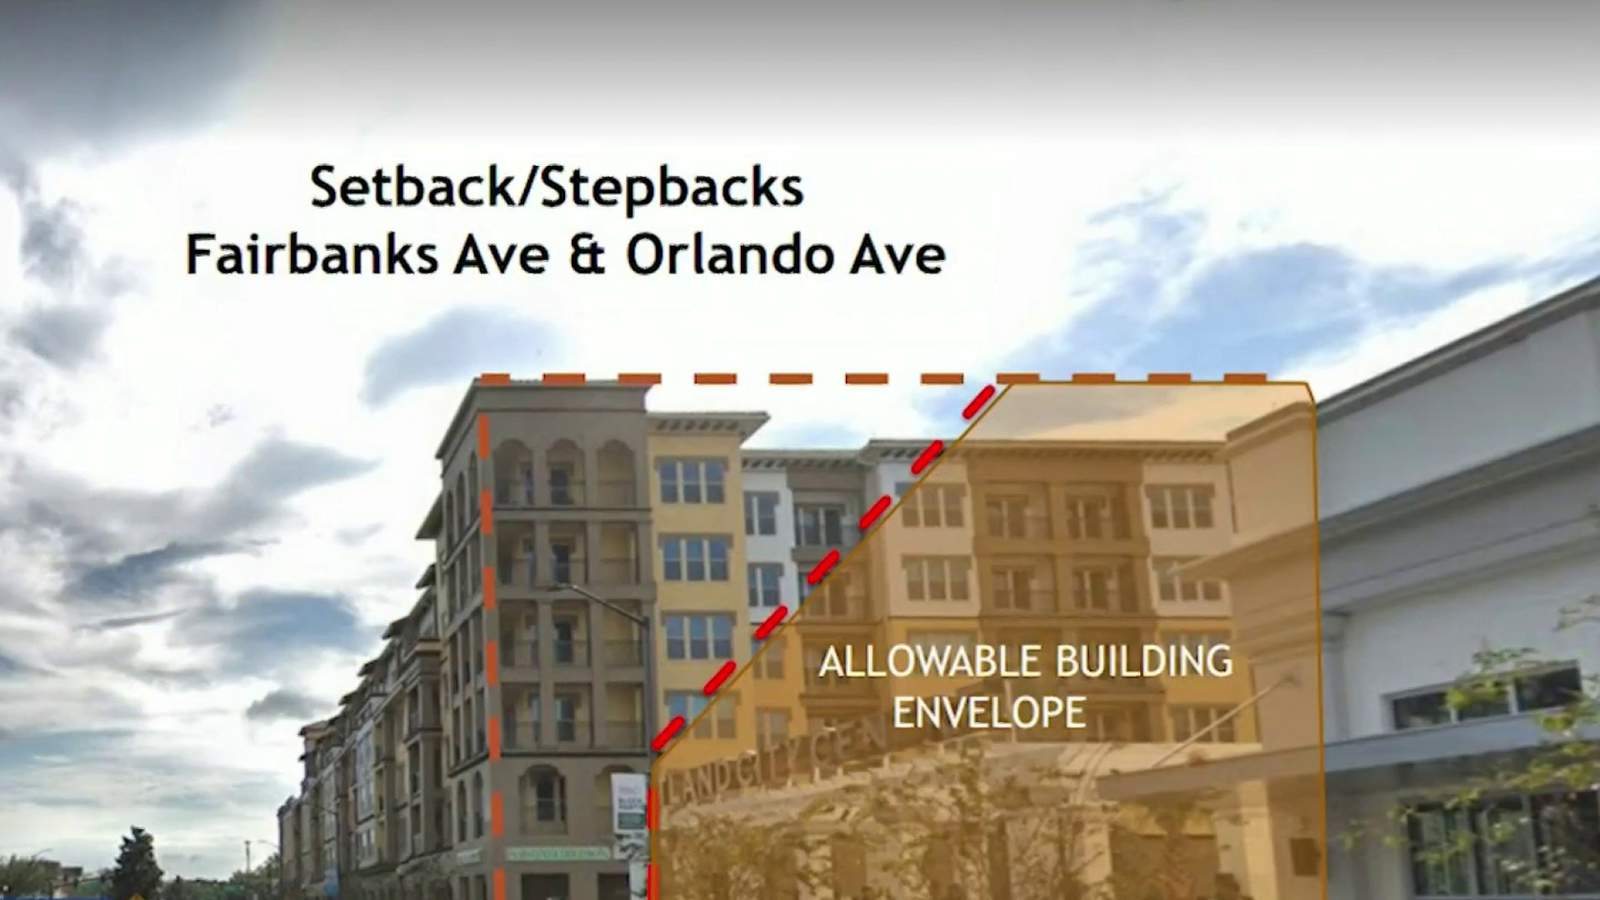 Winter Park leaders approve controversial Orange Avenue Overlay District